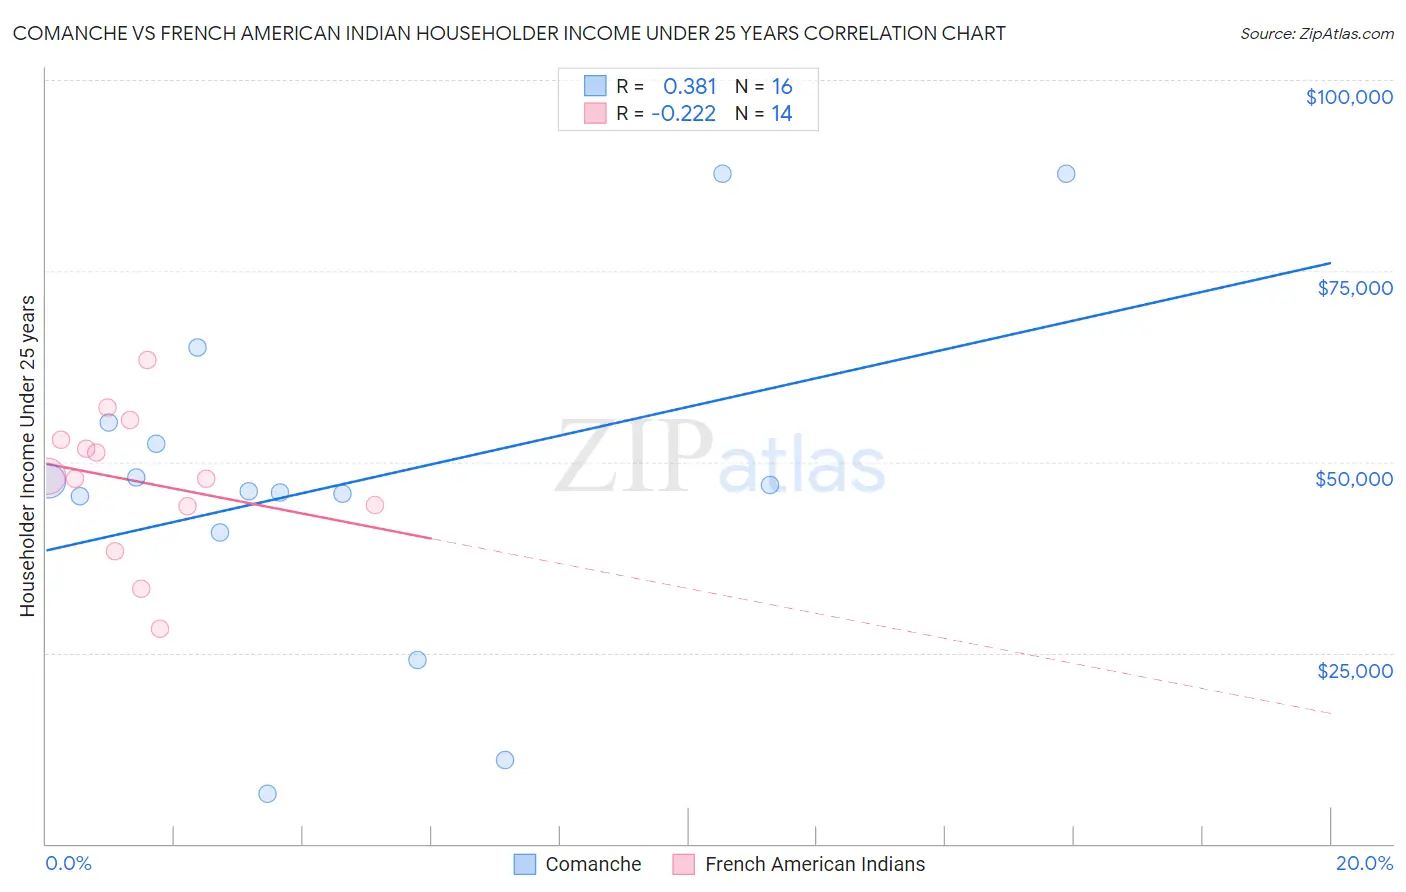 Comanche vs French American Indian Householder Income Under 25 years